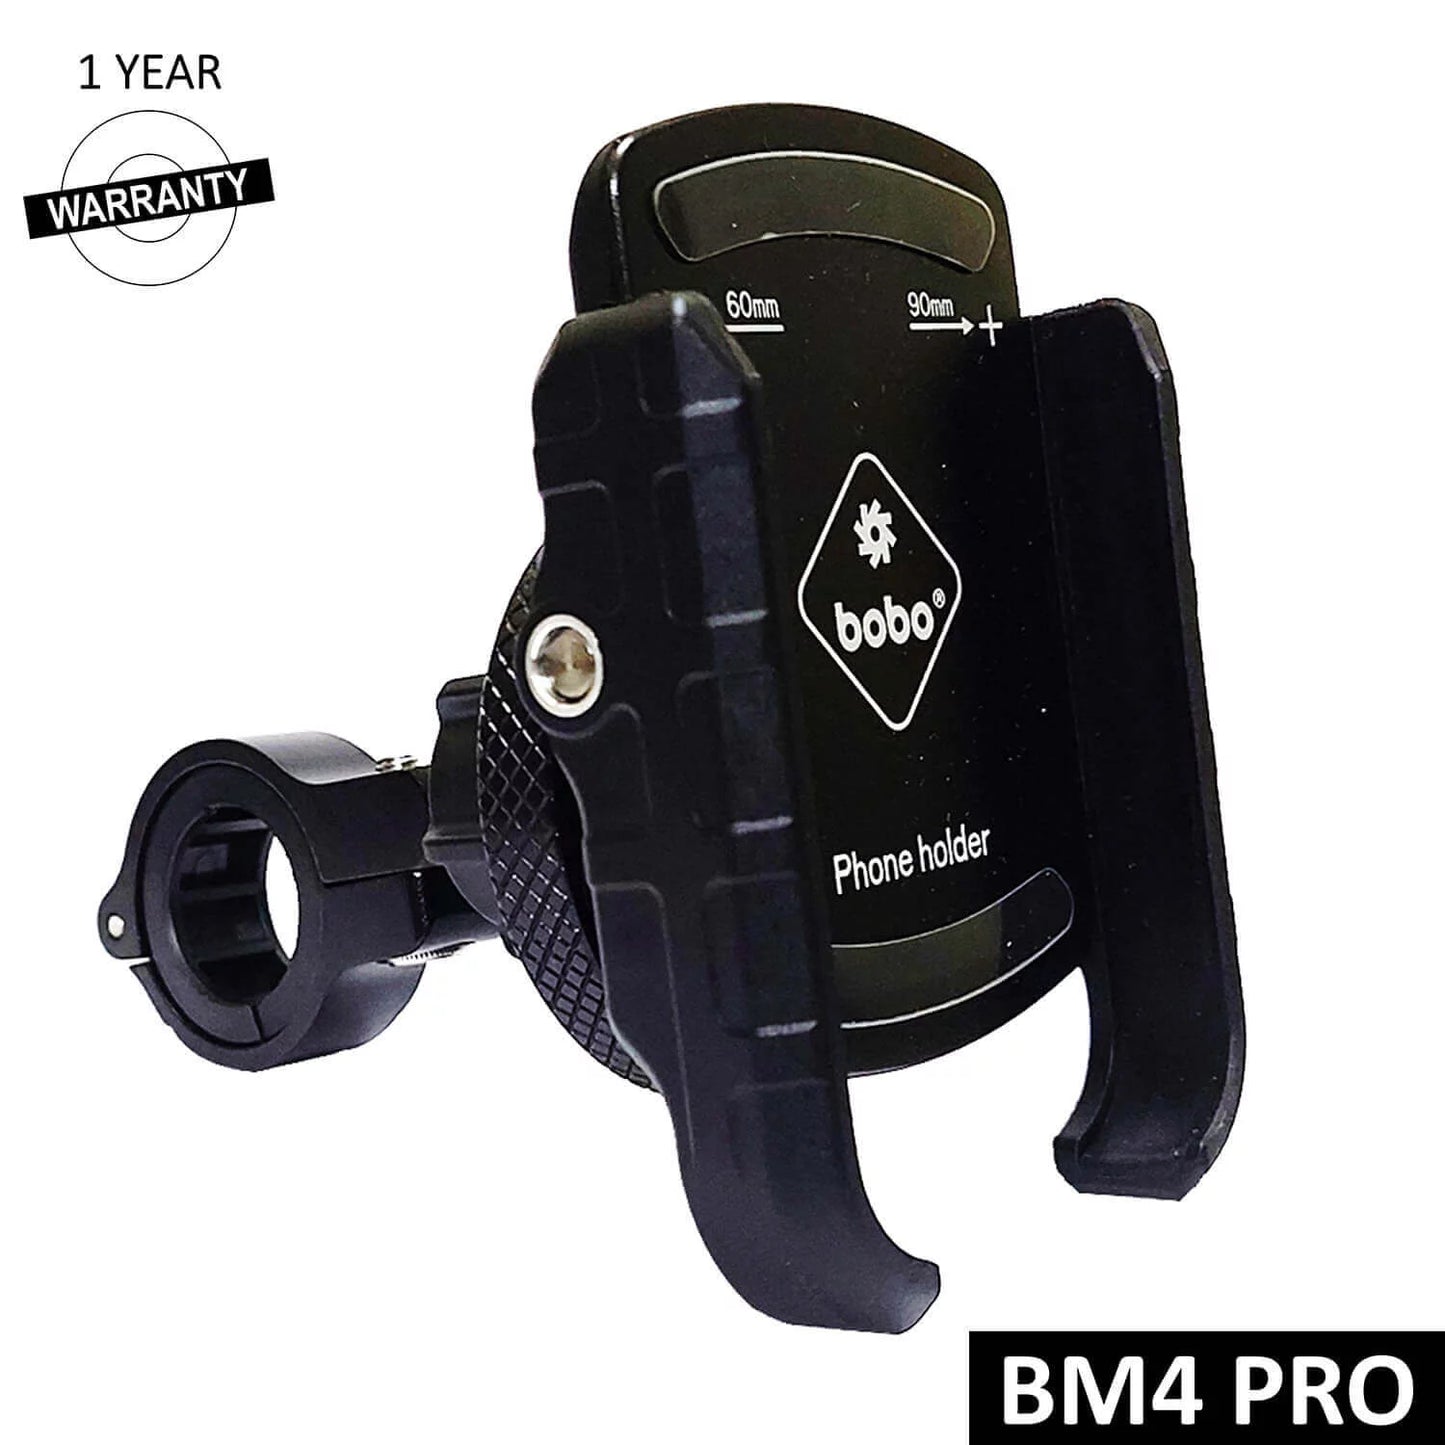 BOBO BM4 PRO Jaw-Grip with Vibration Contoller Waterproof Bike/Motorcycle/Scooter Mobile Phone Holder Mount, Ideal for Maps and GPS Navigation (Black)